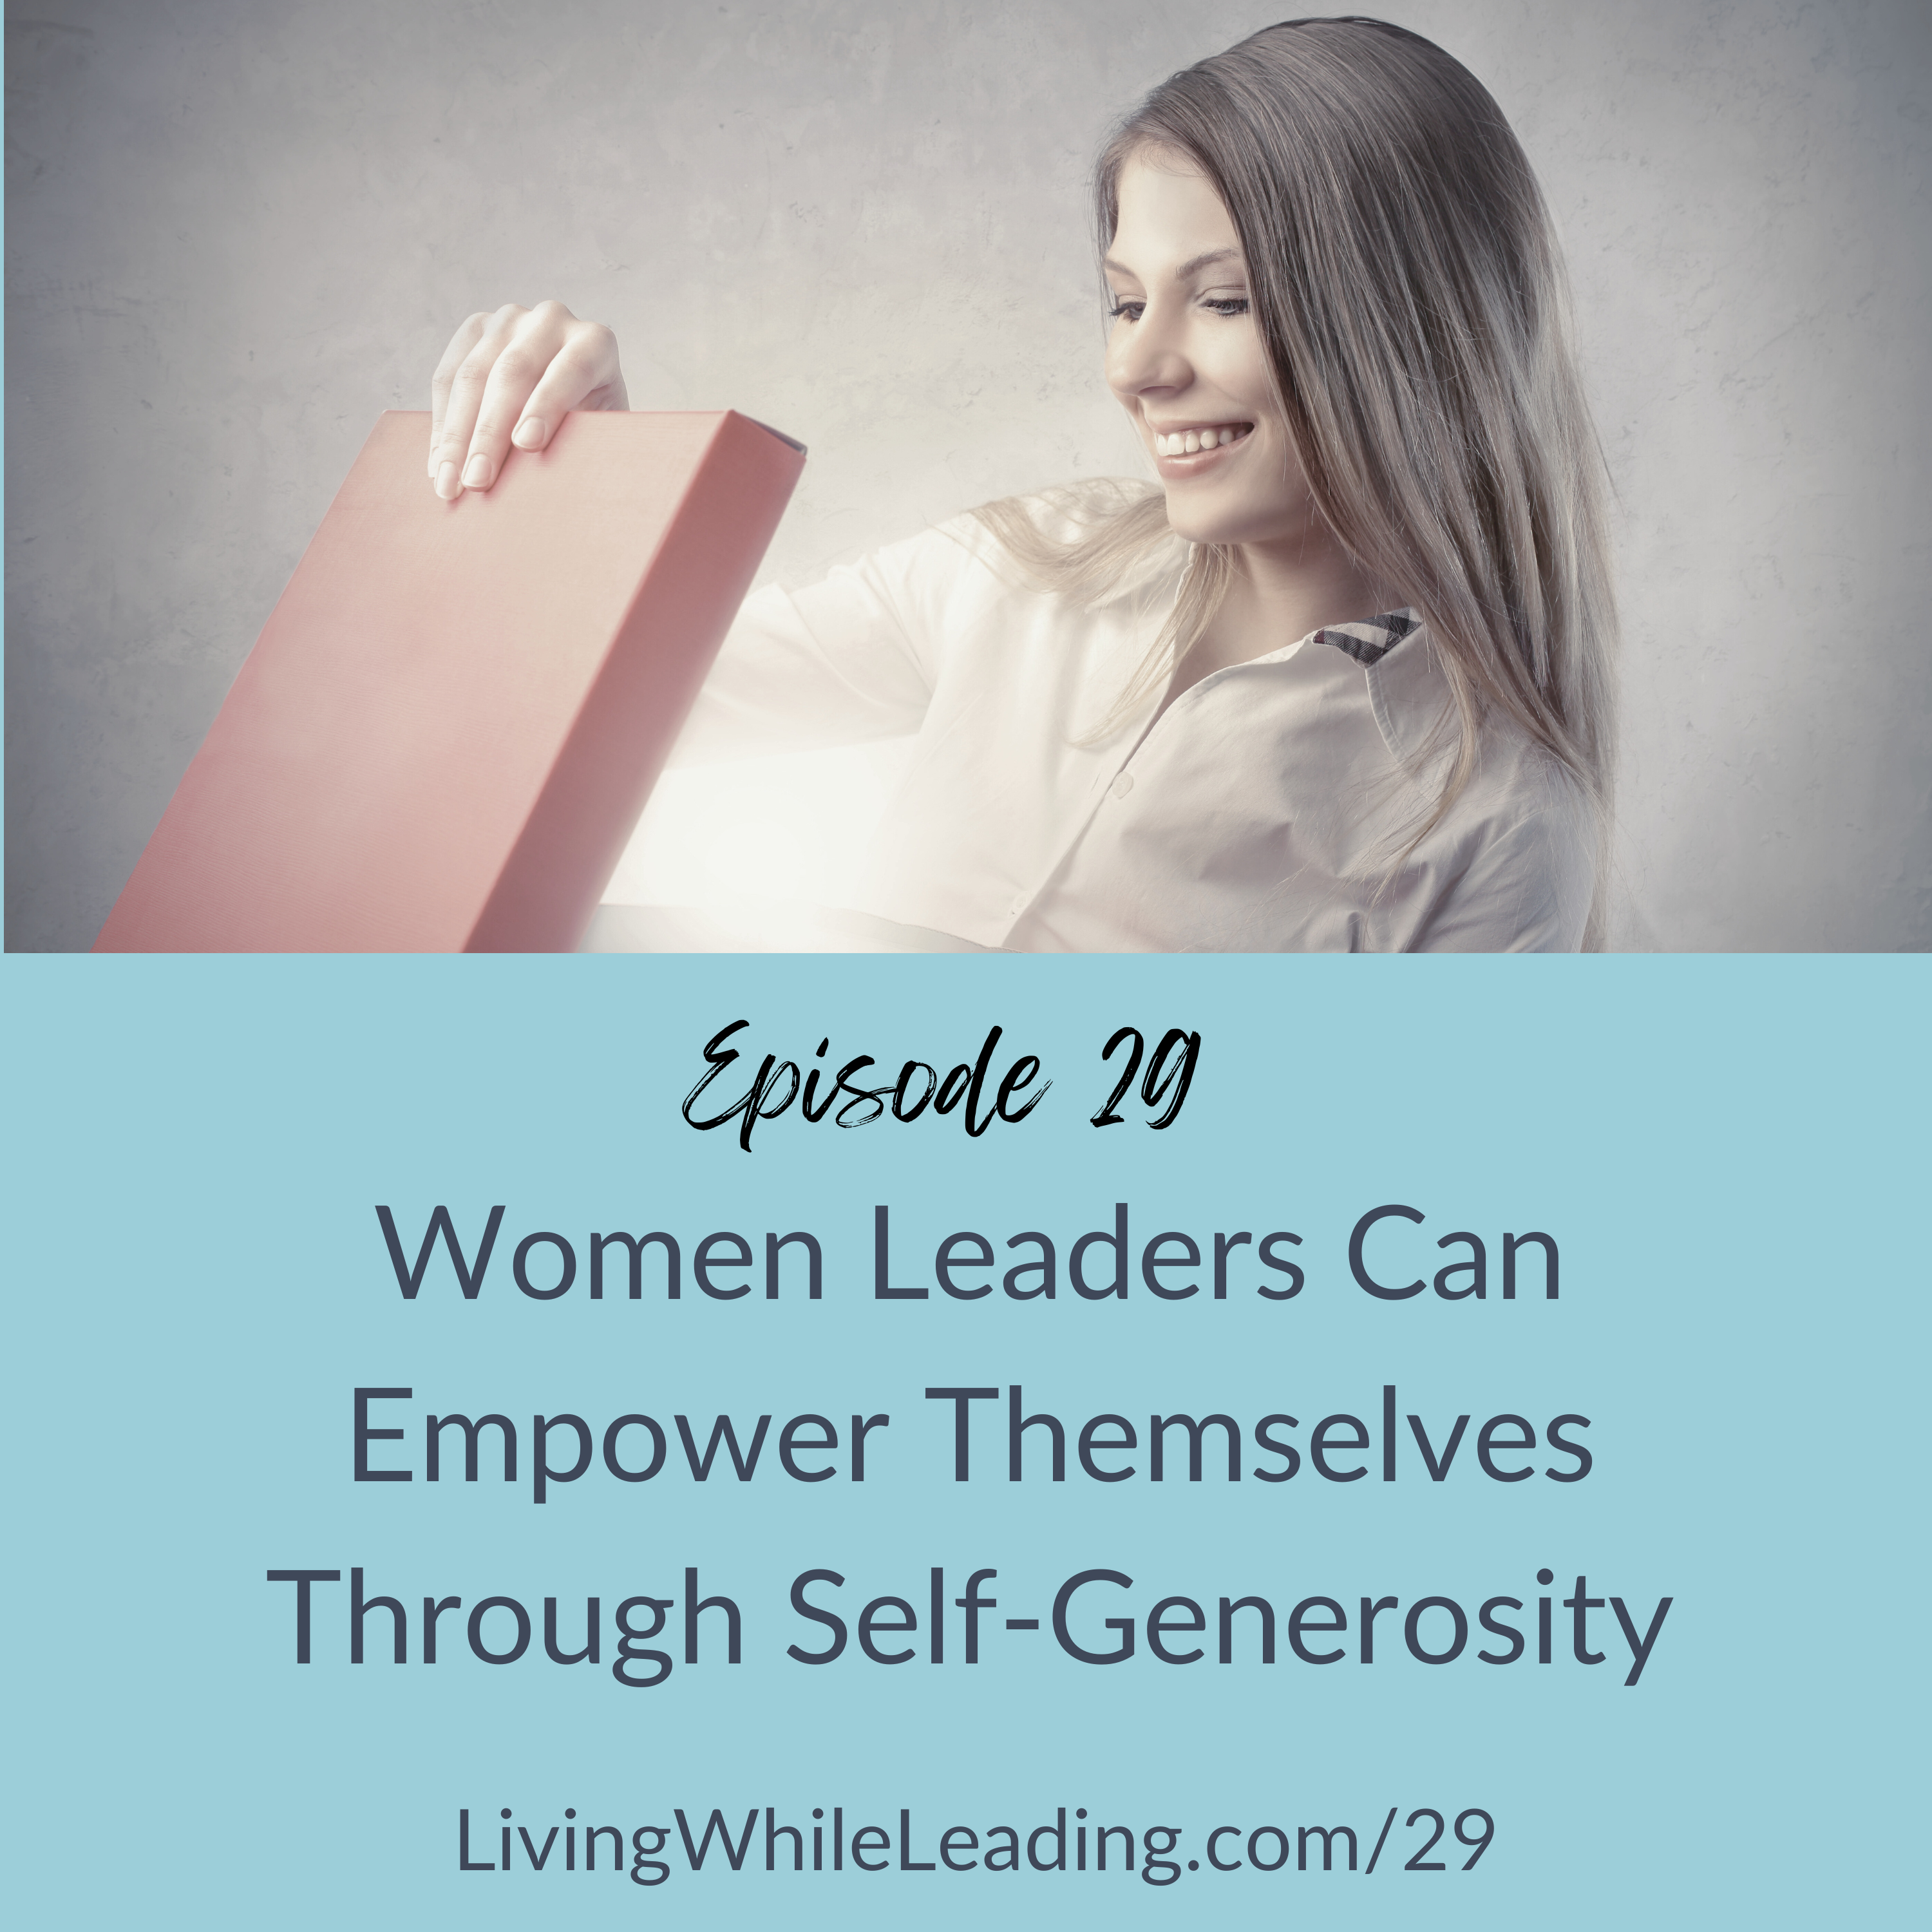 The image features a young business woman wearing a while blouse. She's opening a gift box that has rays of light coming out of it. The text reads: Episode 29, Women Leaders Can Empower Themselves Through Self-Generosit, LivingWhileLeading.com/29